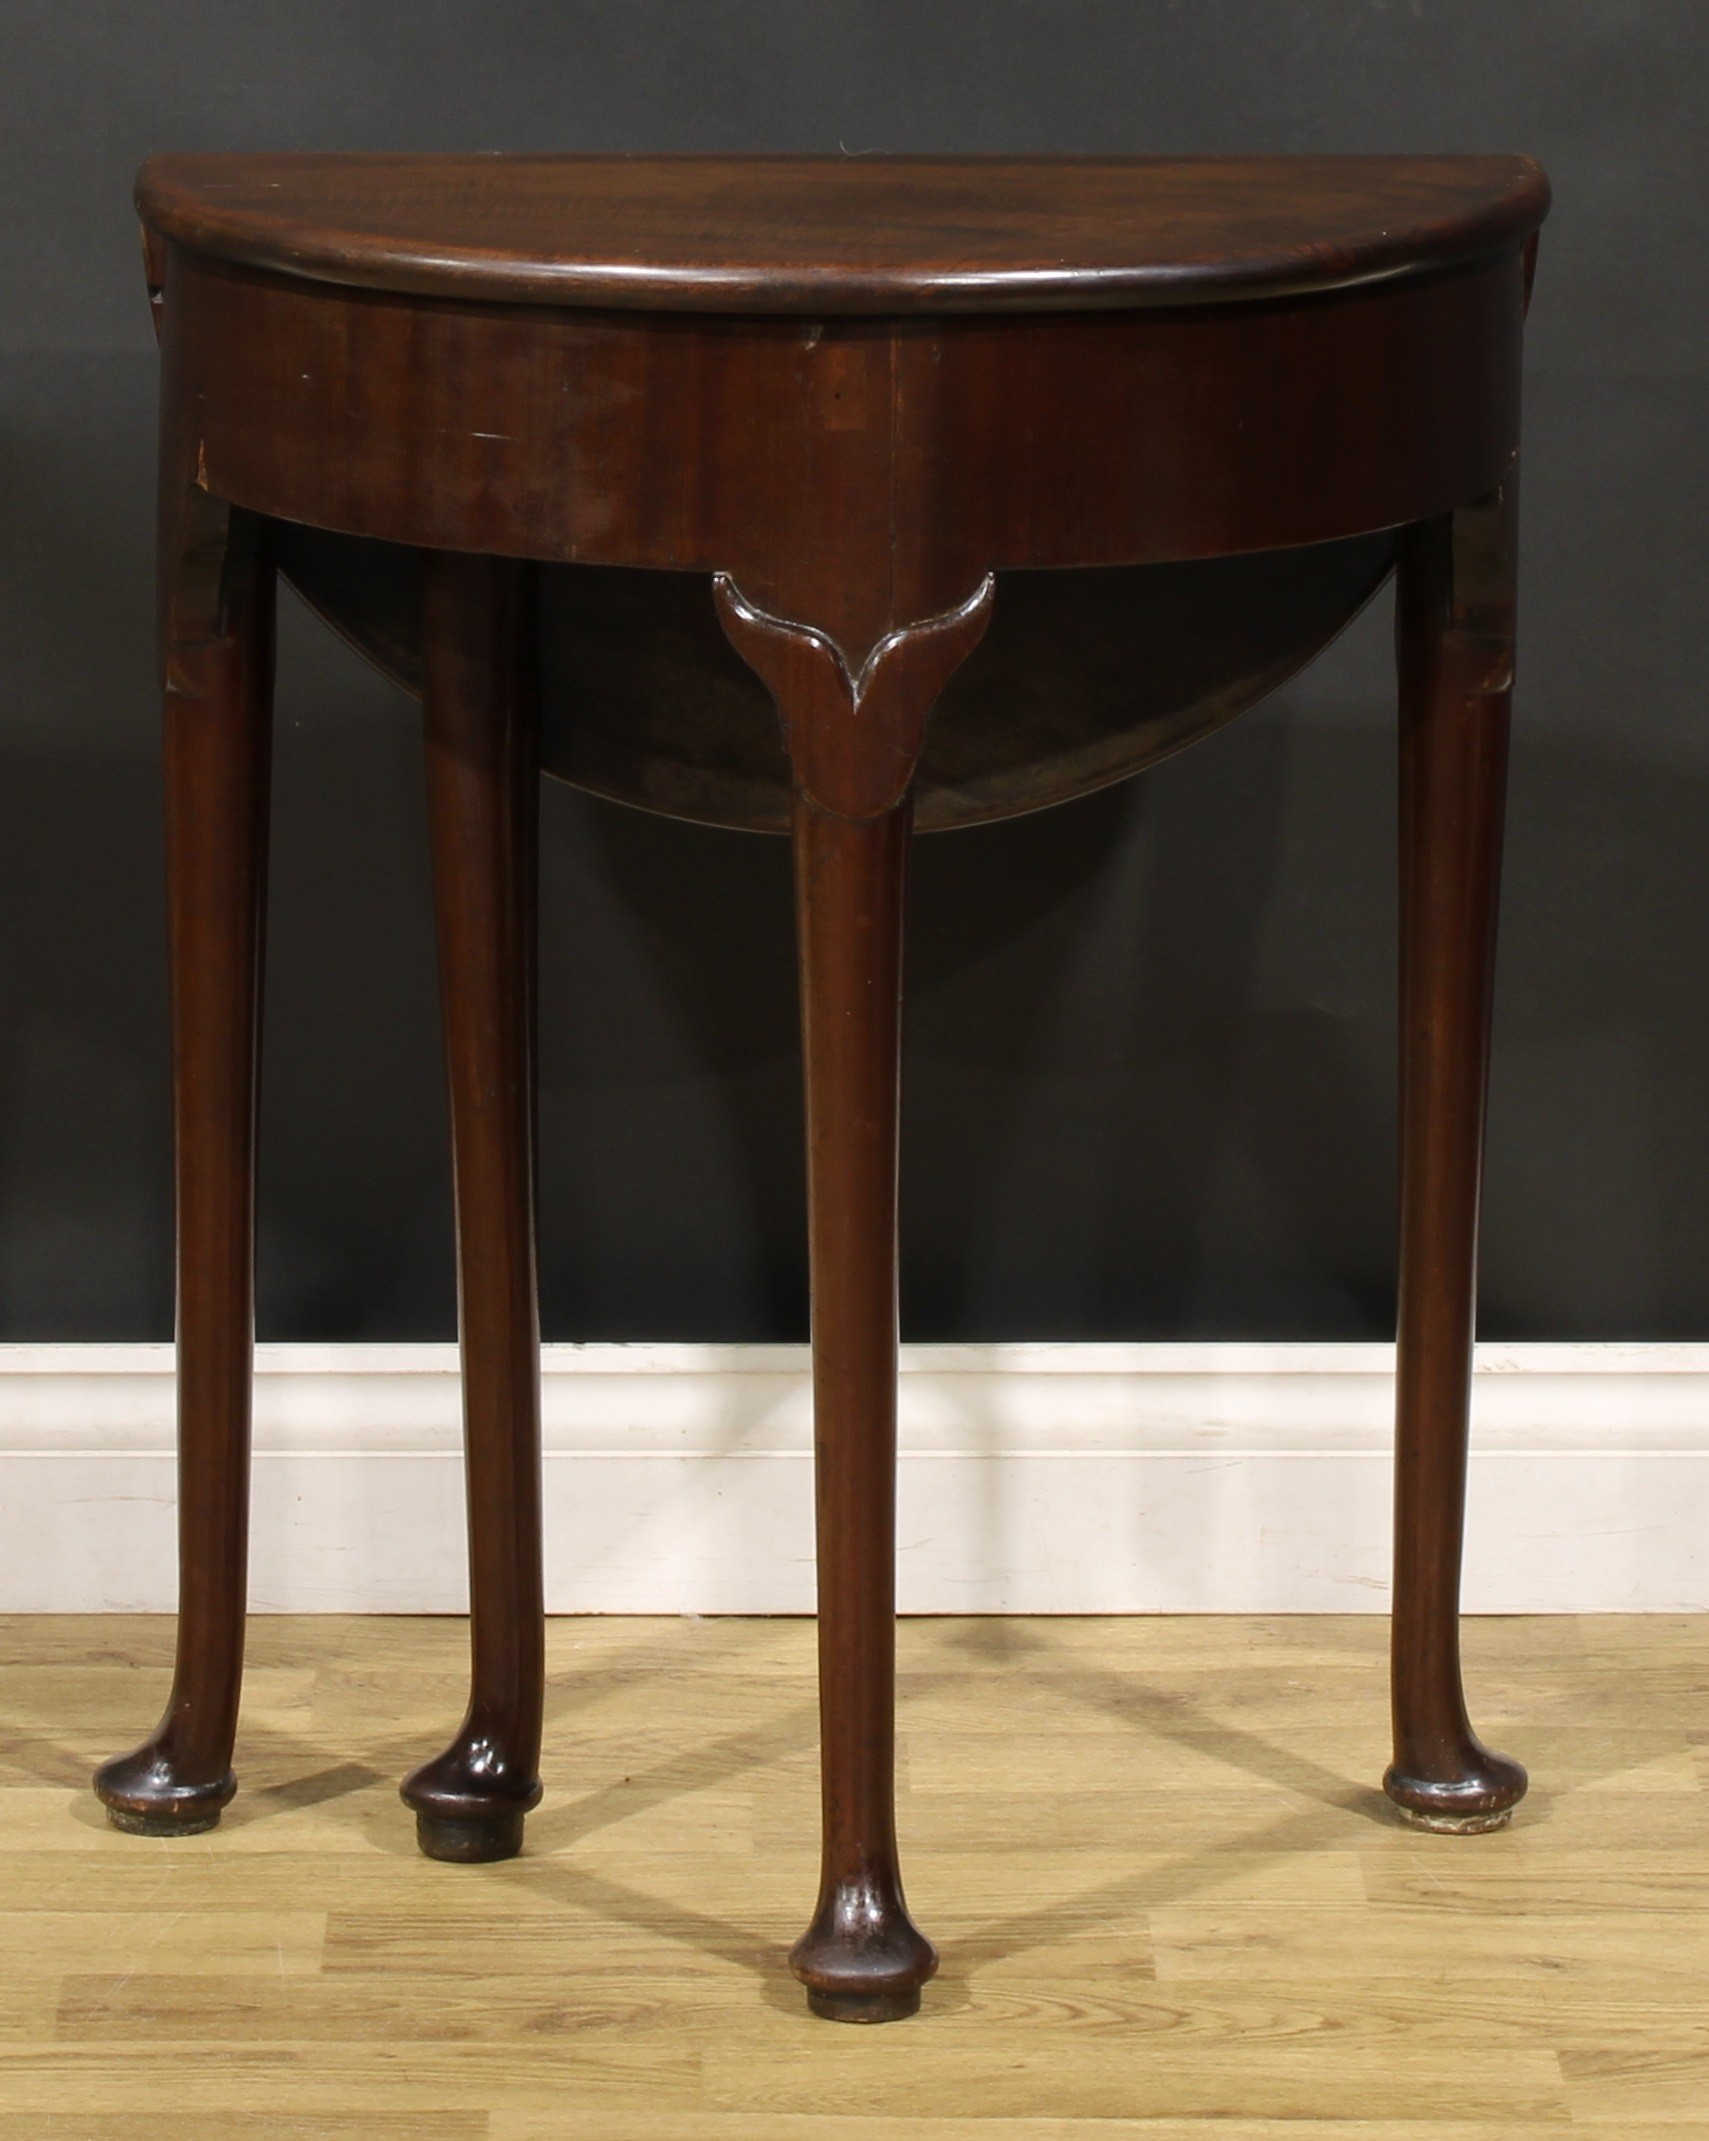 A 19th century mahogany gateleg lamp or occasional table, fall leaf, straightened cabriole legs, pad - Image 2 of 6